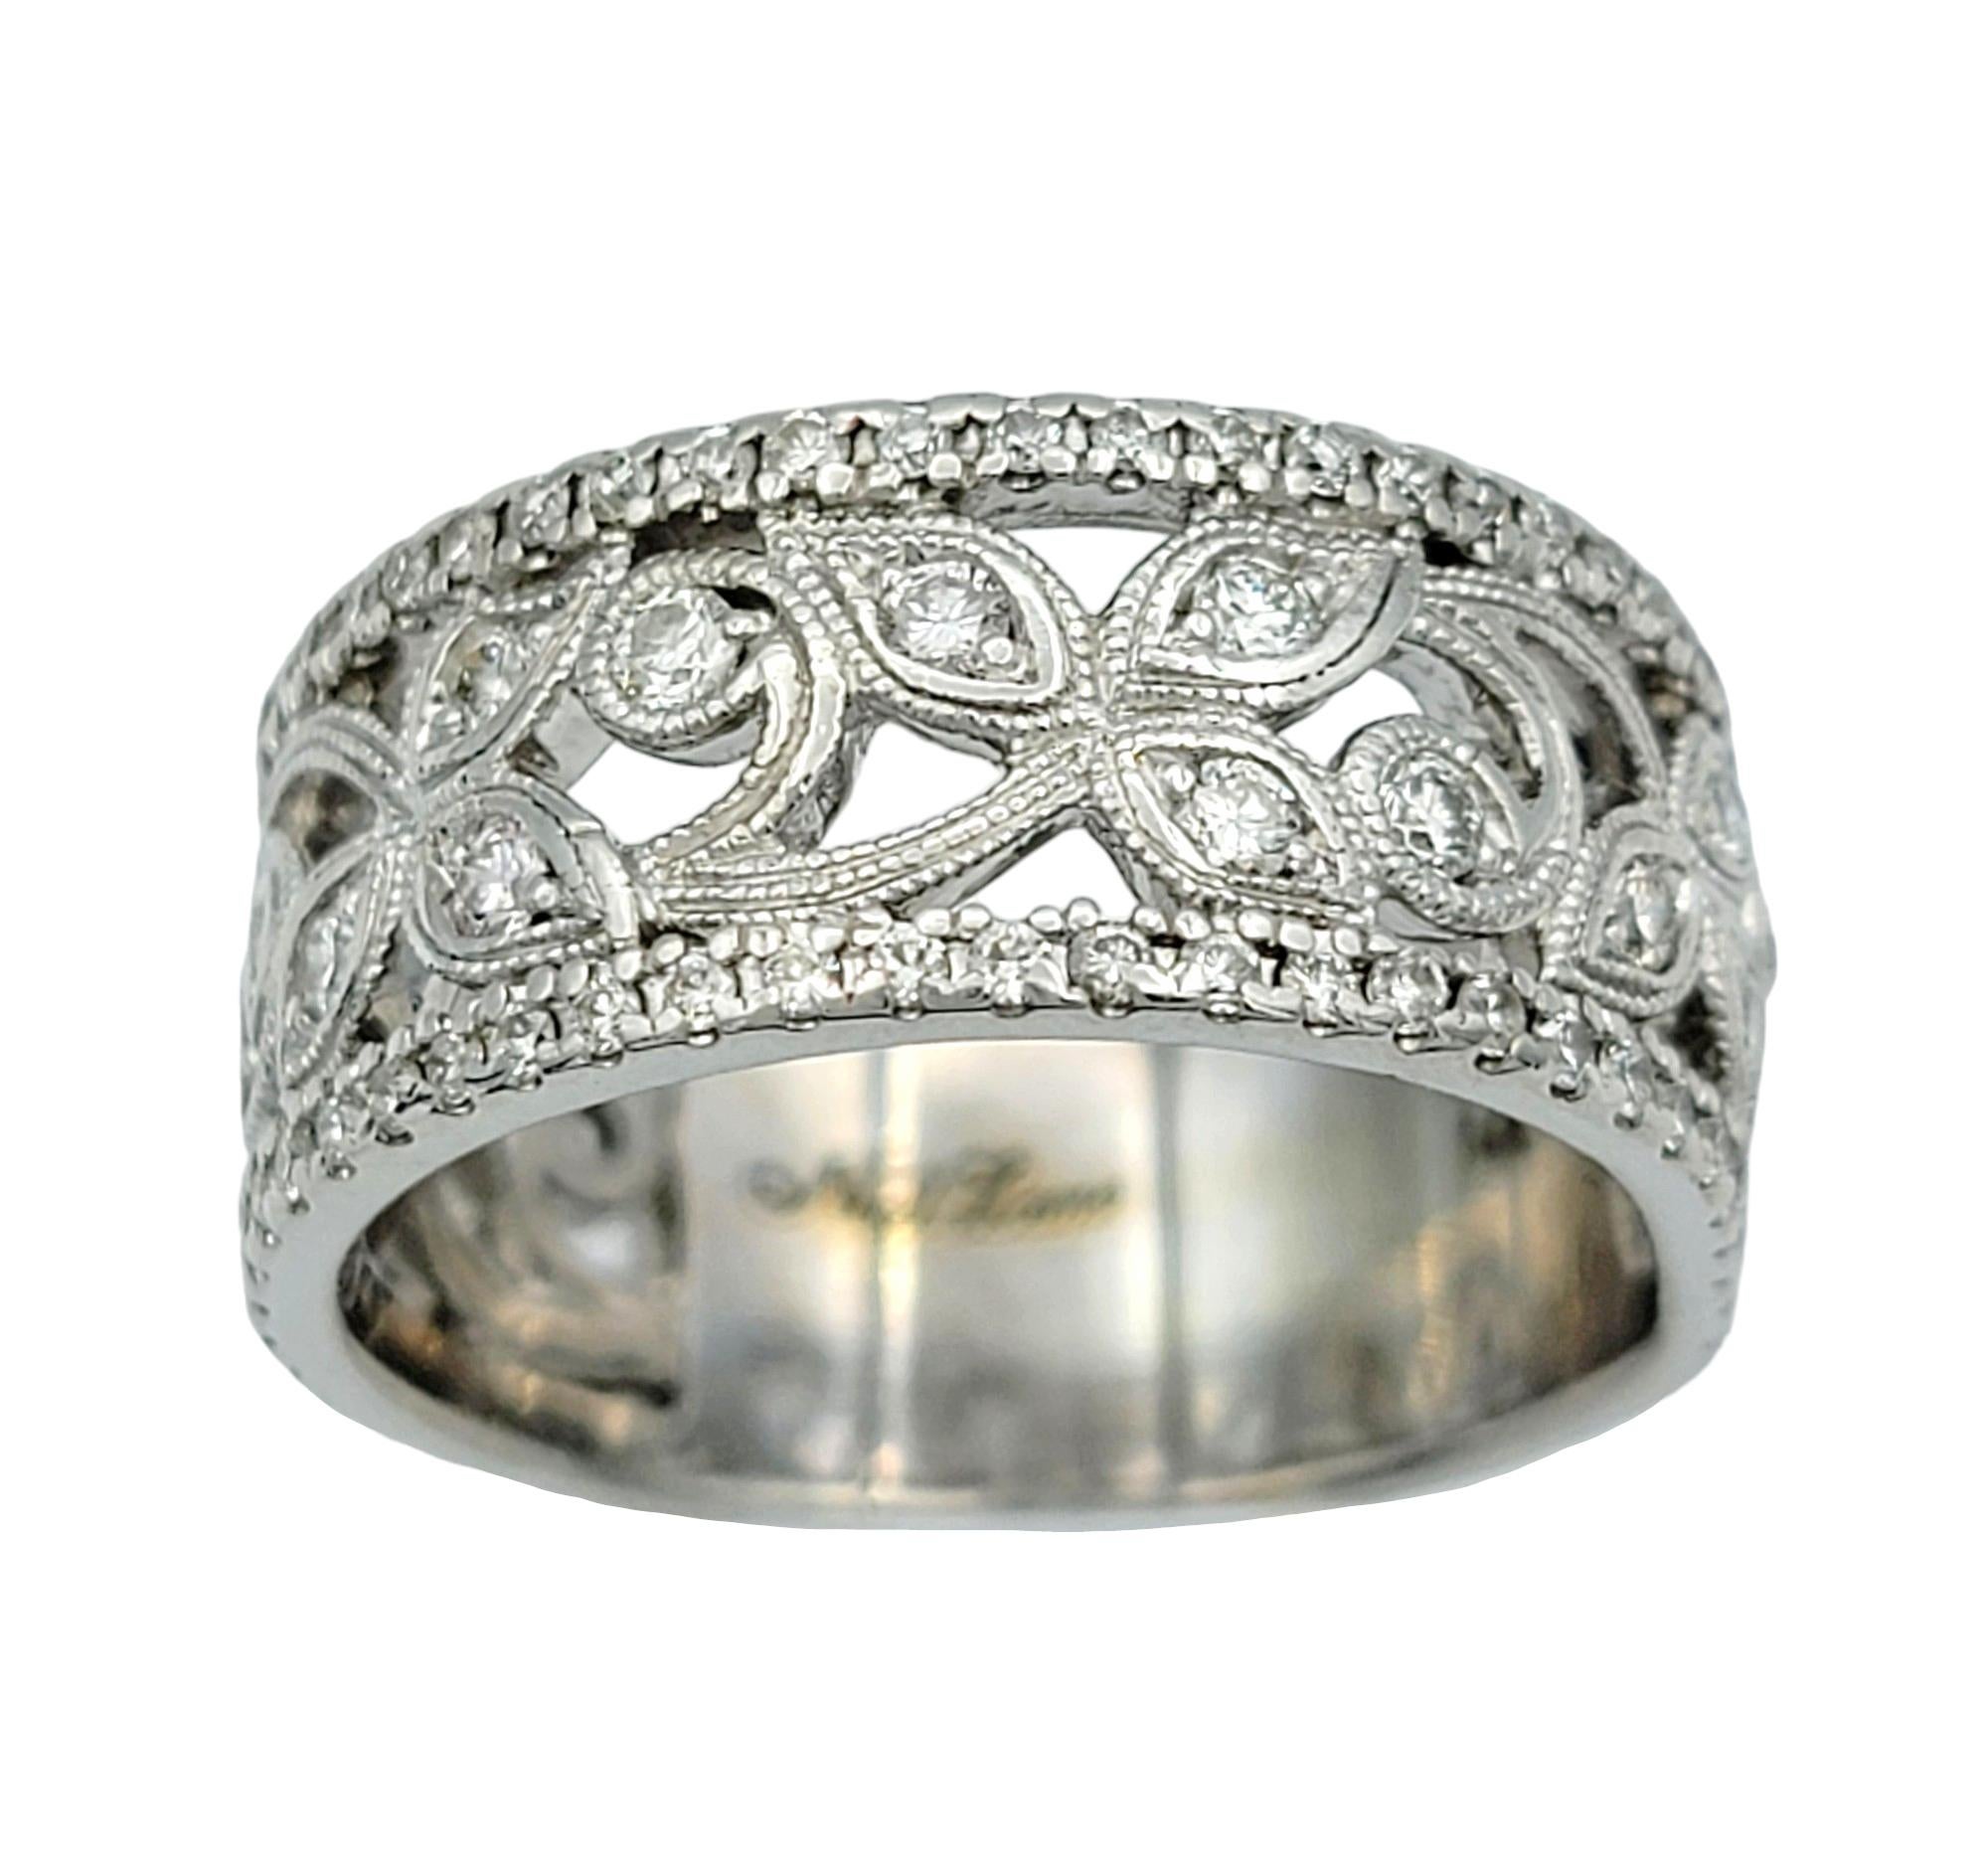 Contemporary Neil Lane Diamond Anniversary Band Ring with Leaf Motif in 14 Karat White Gold For Sale